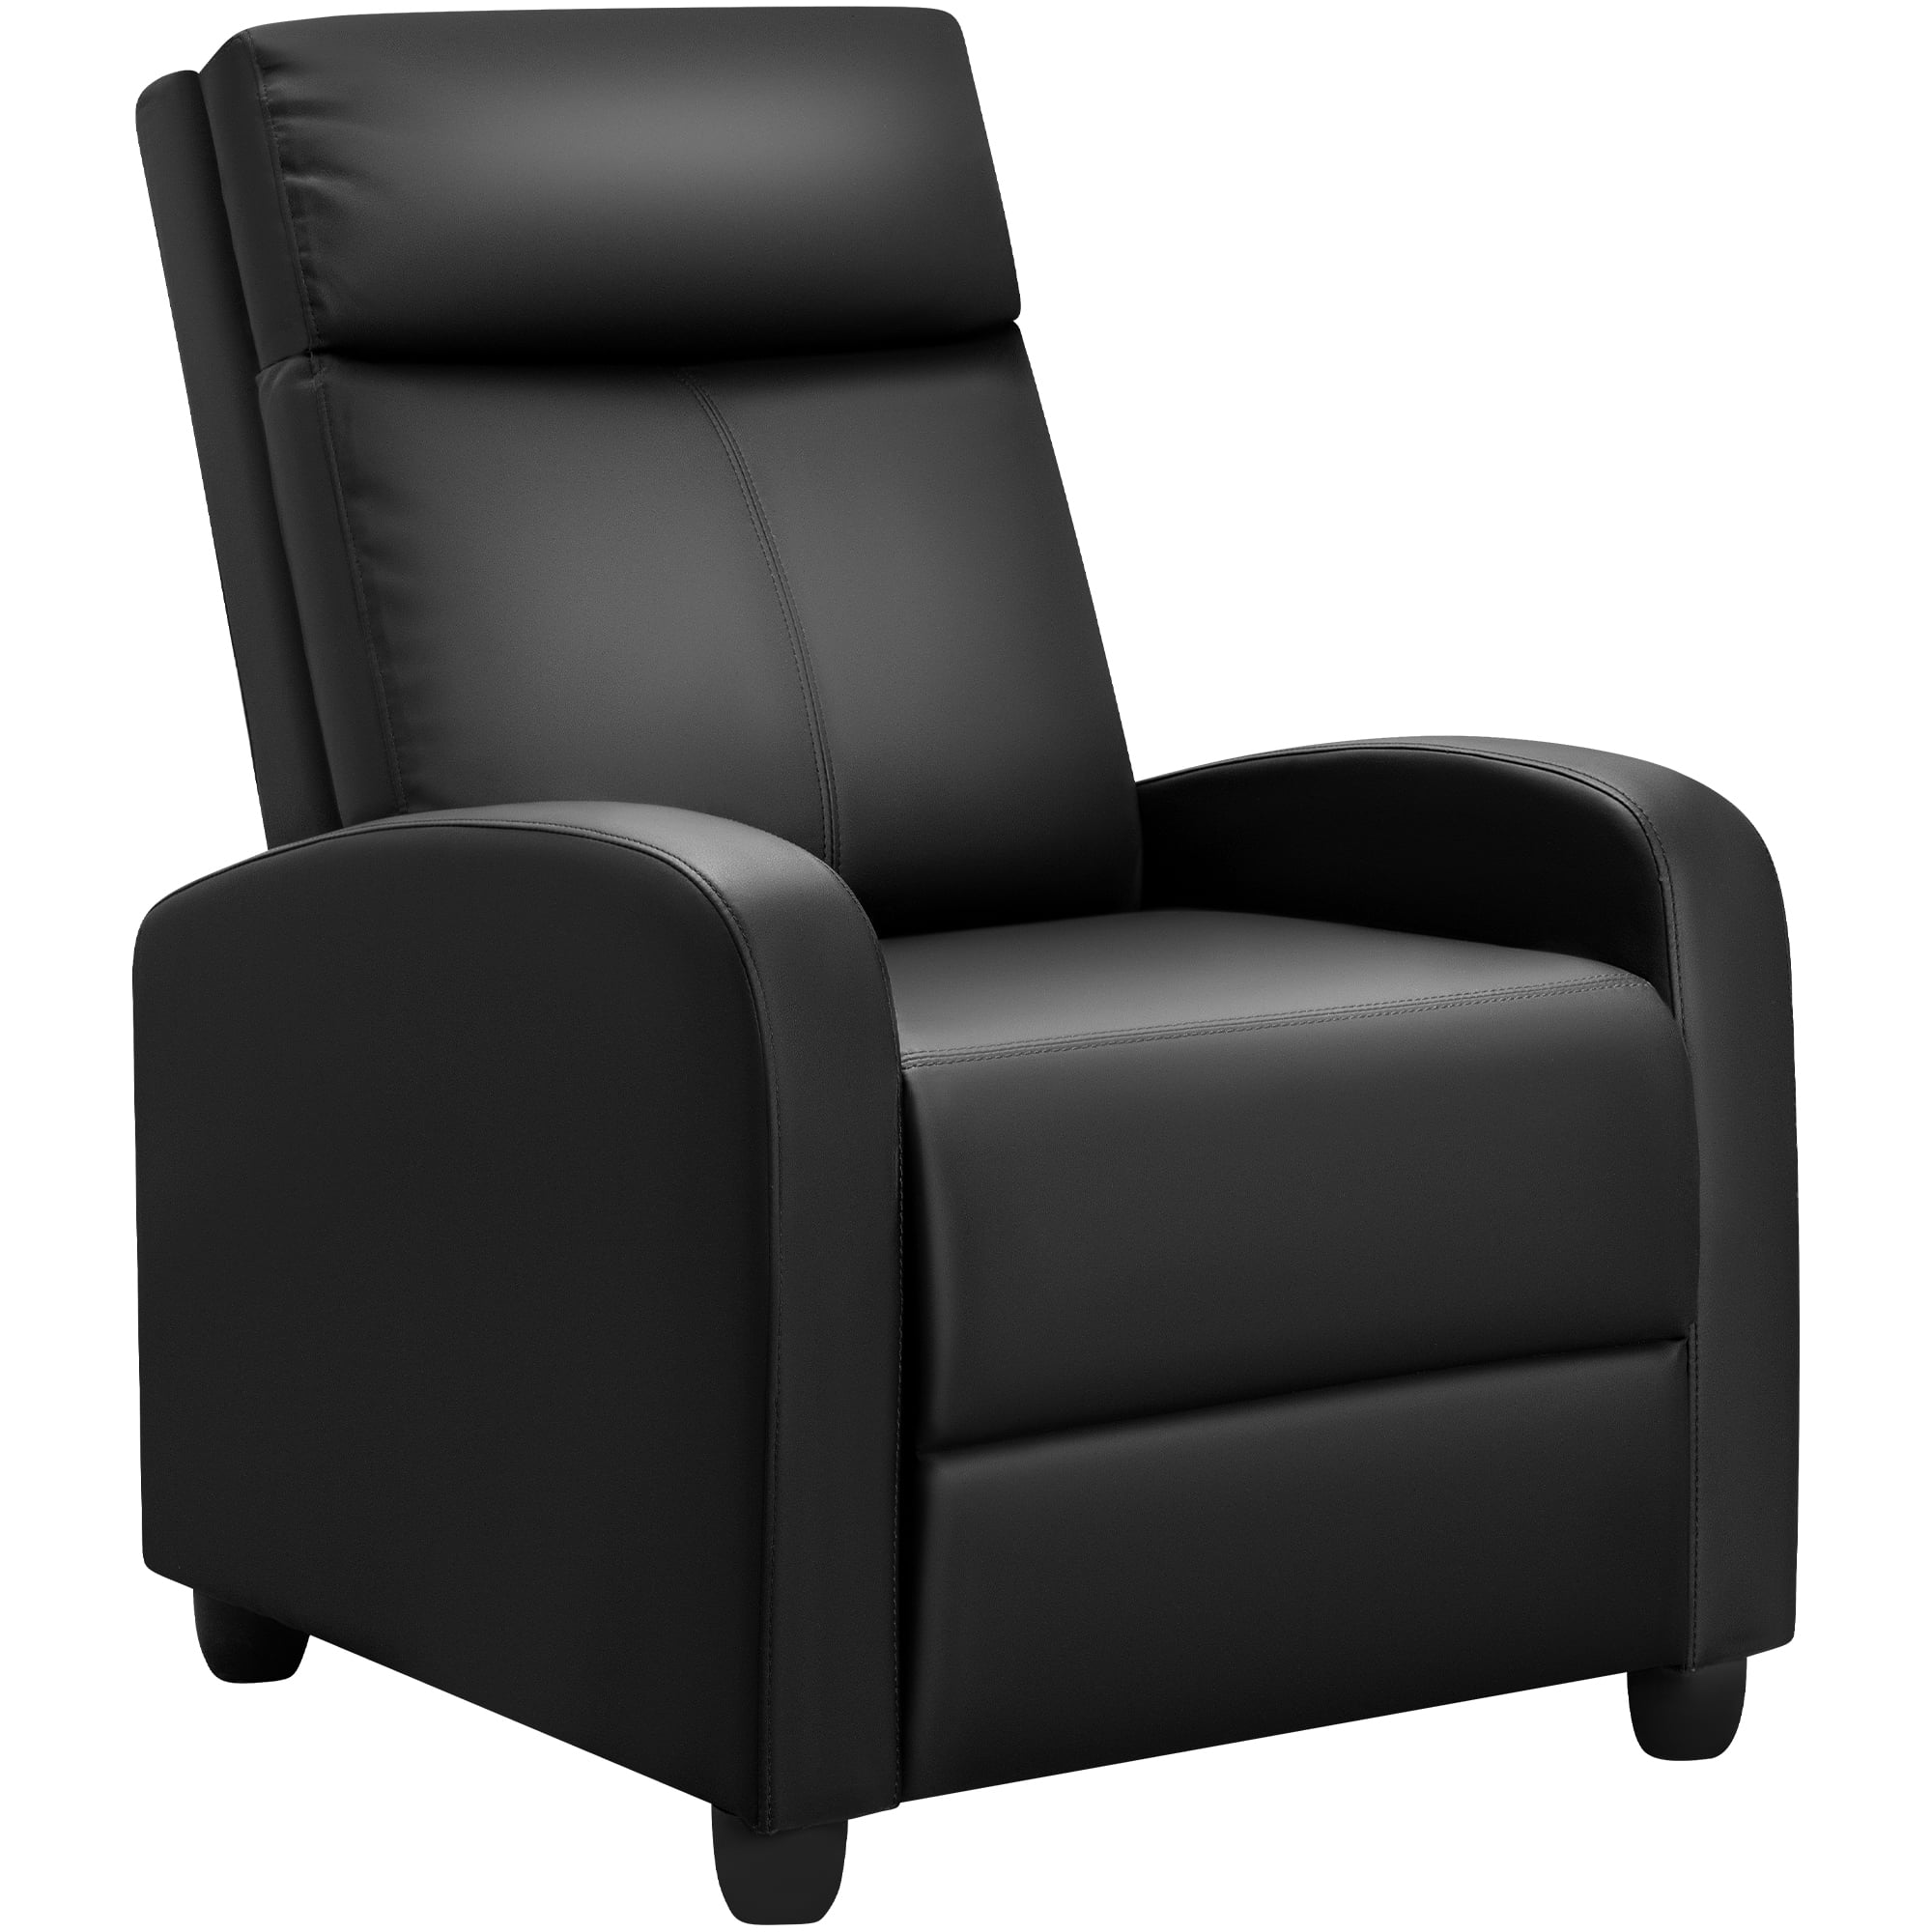 Dropship Recliner Chair PU Leather Recliner Sofa Home Theater